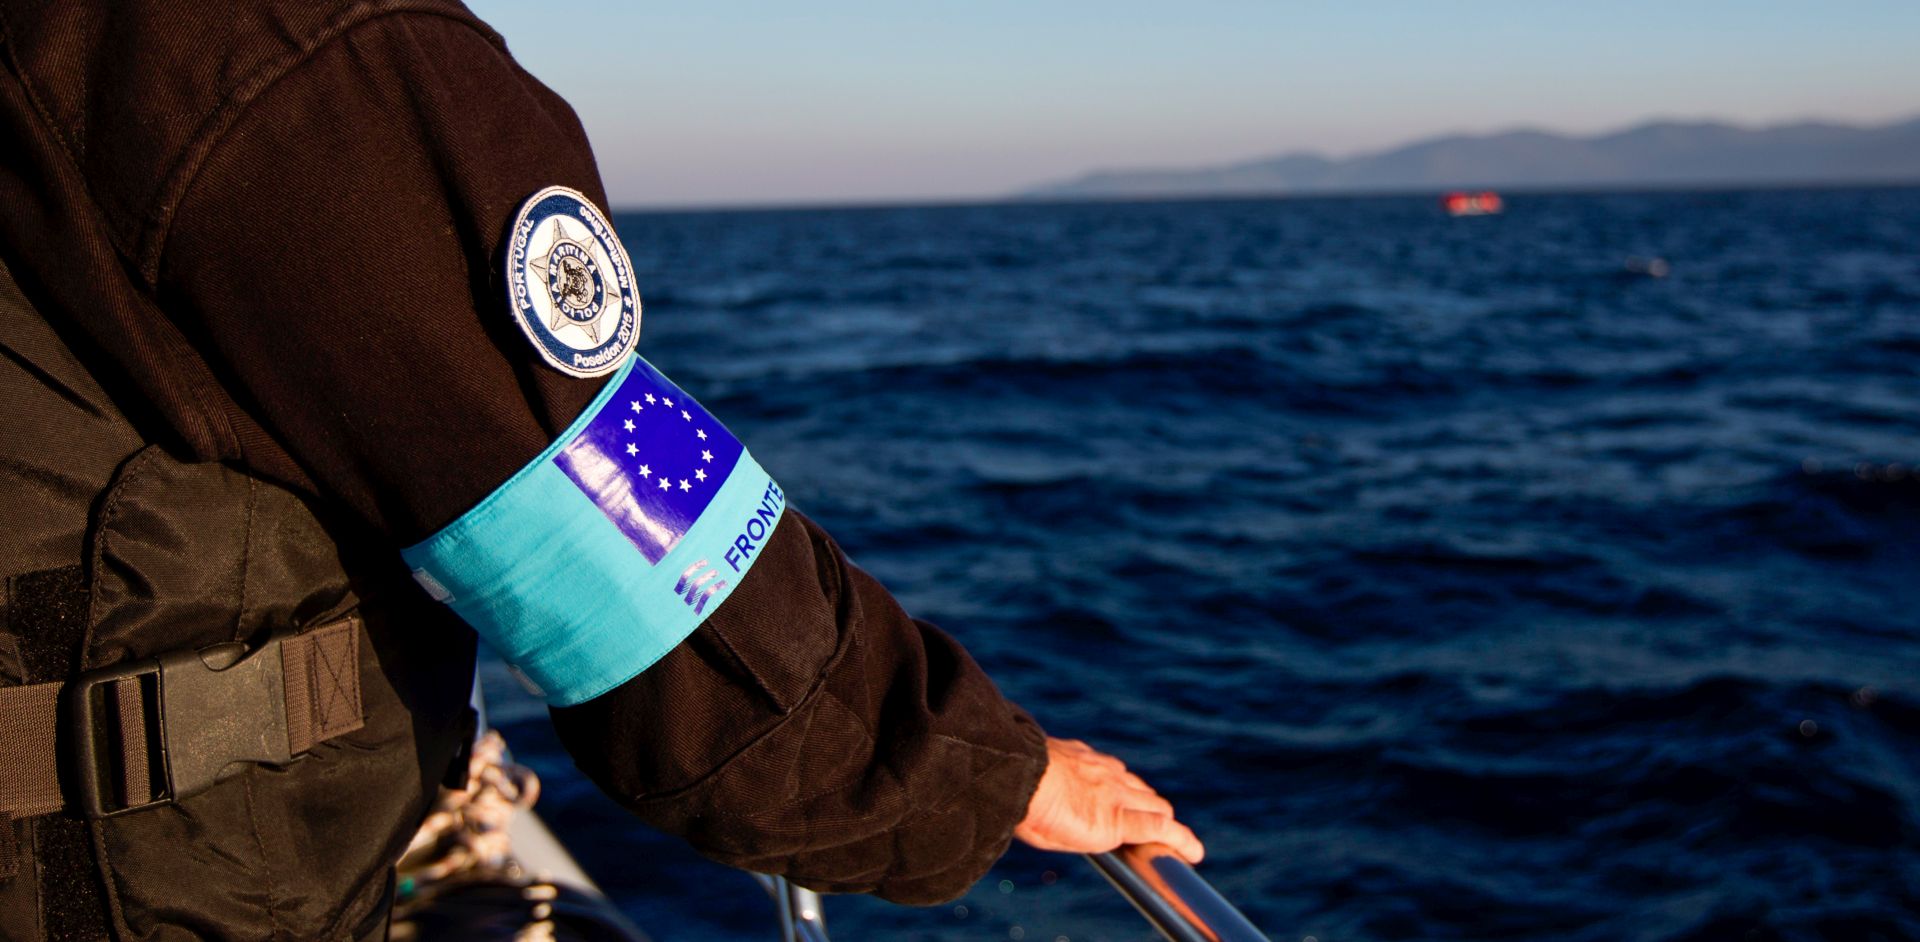 Portuguese police officers, representatives of the EU's border management agency Frontex, during on a patrol on board in Greek island of Lesbos on November 20, 2015.